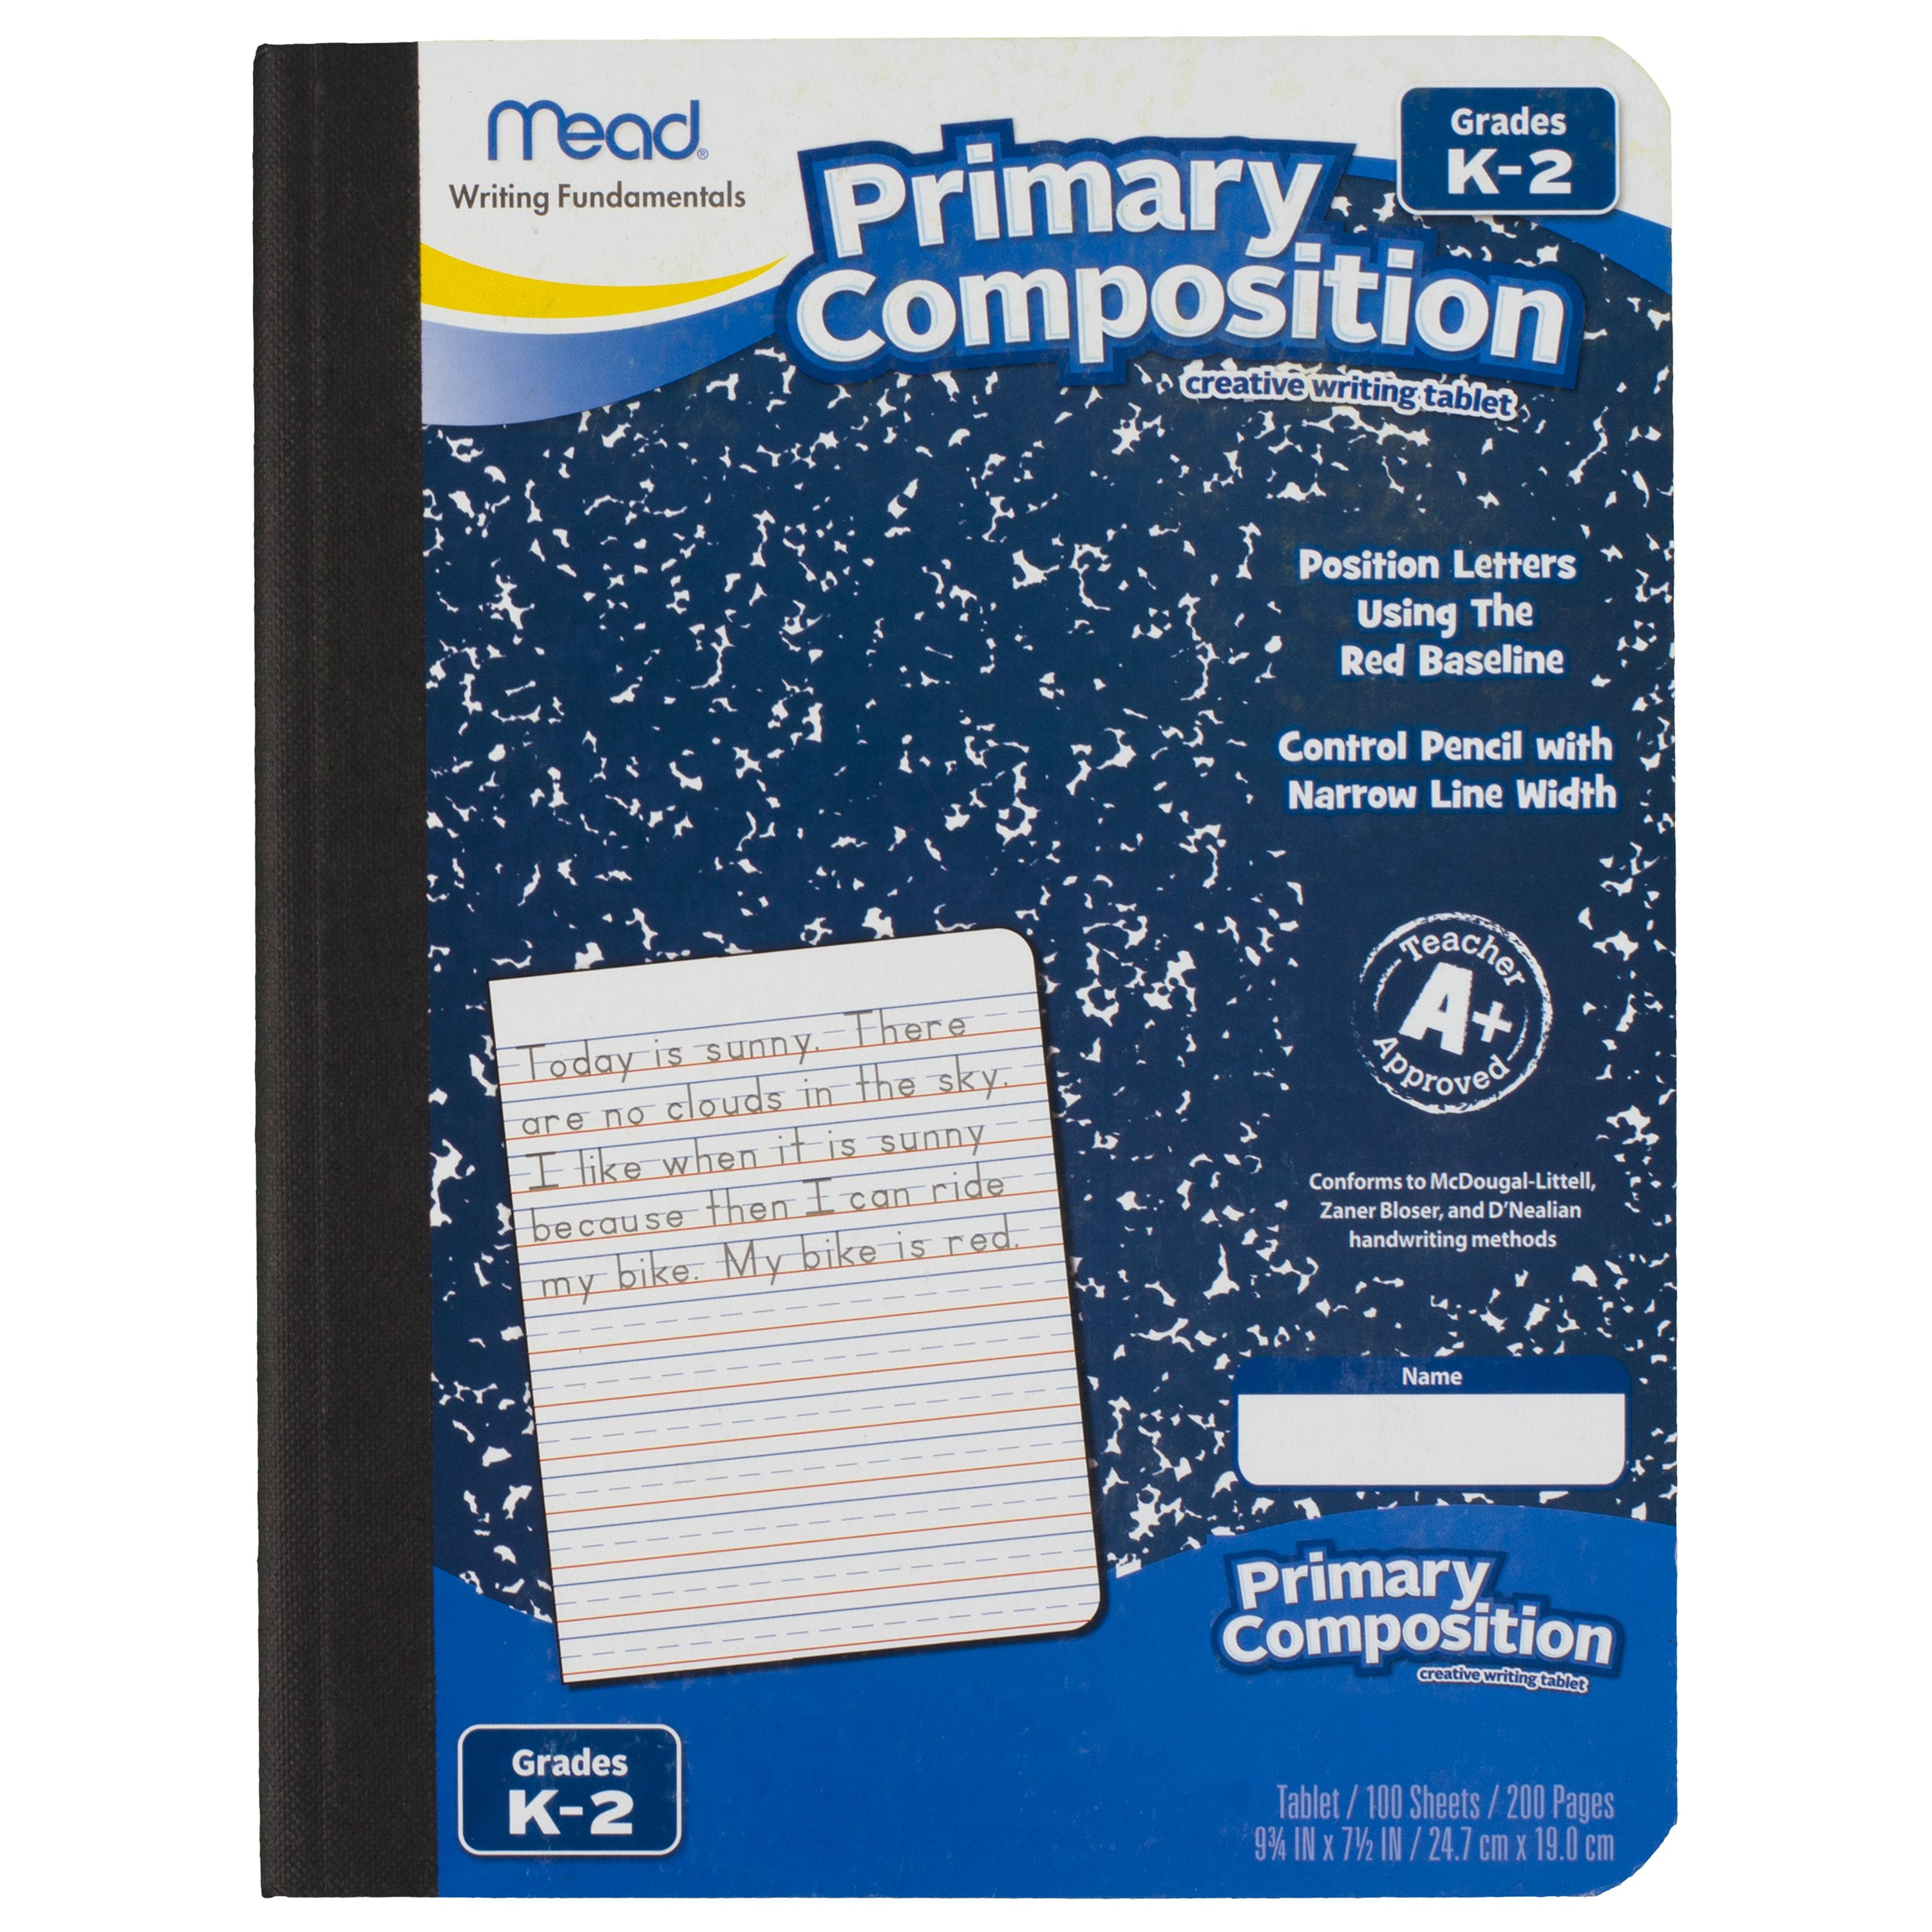 Mead Composition Book/Notebook 09902 100 Sheets Grades K-2 Primary Wide Ruled Paper 